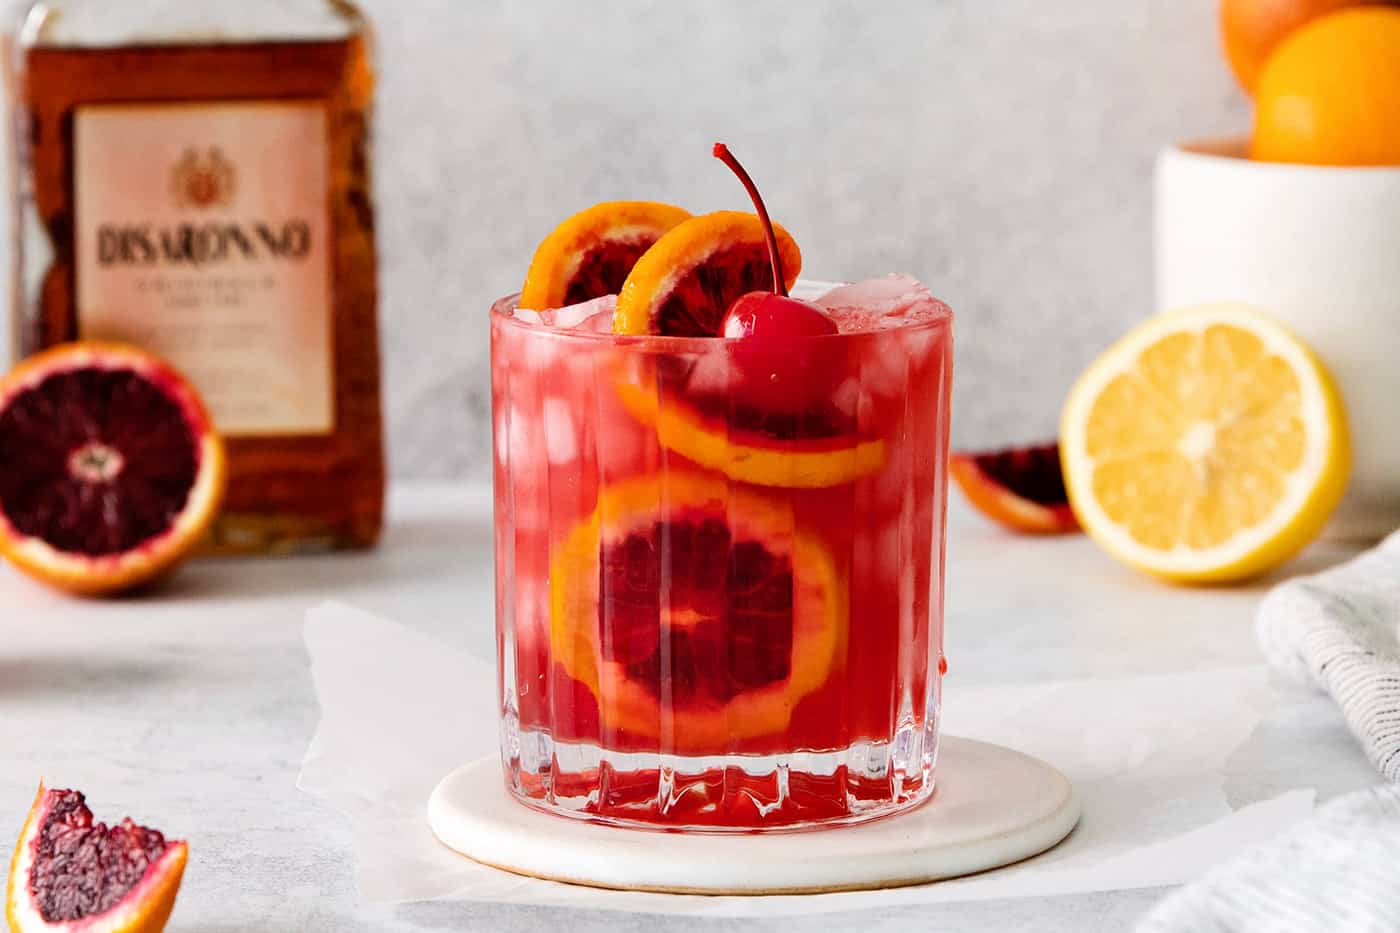 a sour cocktail made with amaretto and blood orange juice